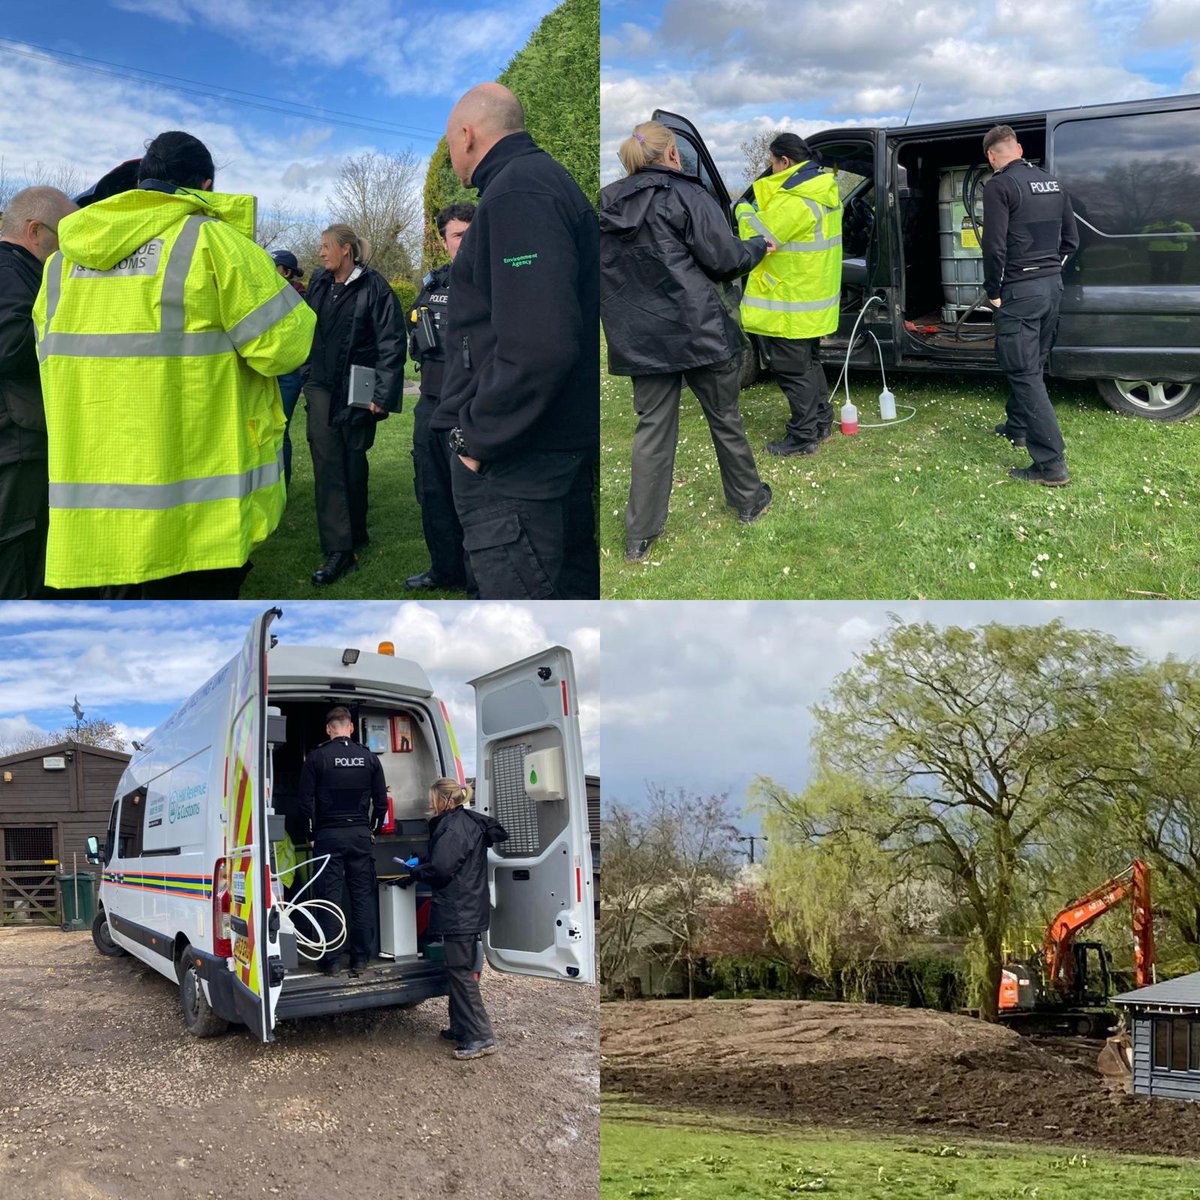 Joint working yesterday in Bucks, alongside @ThamesVP @EnvAgencySE @HMRCgovuk looking at illegal waste and illegal use of red diesel. Vehicles & diesel seized and investigation is ongoing into illegal deposits of waste #waste #WasteCrime #environmentcrime #envirocrime #crime